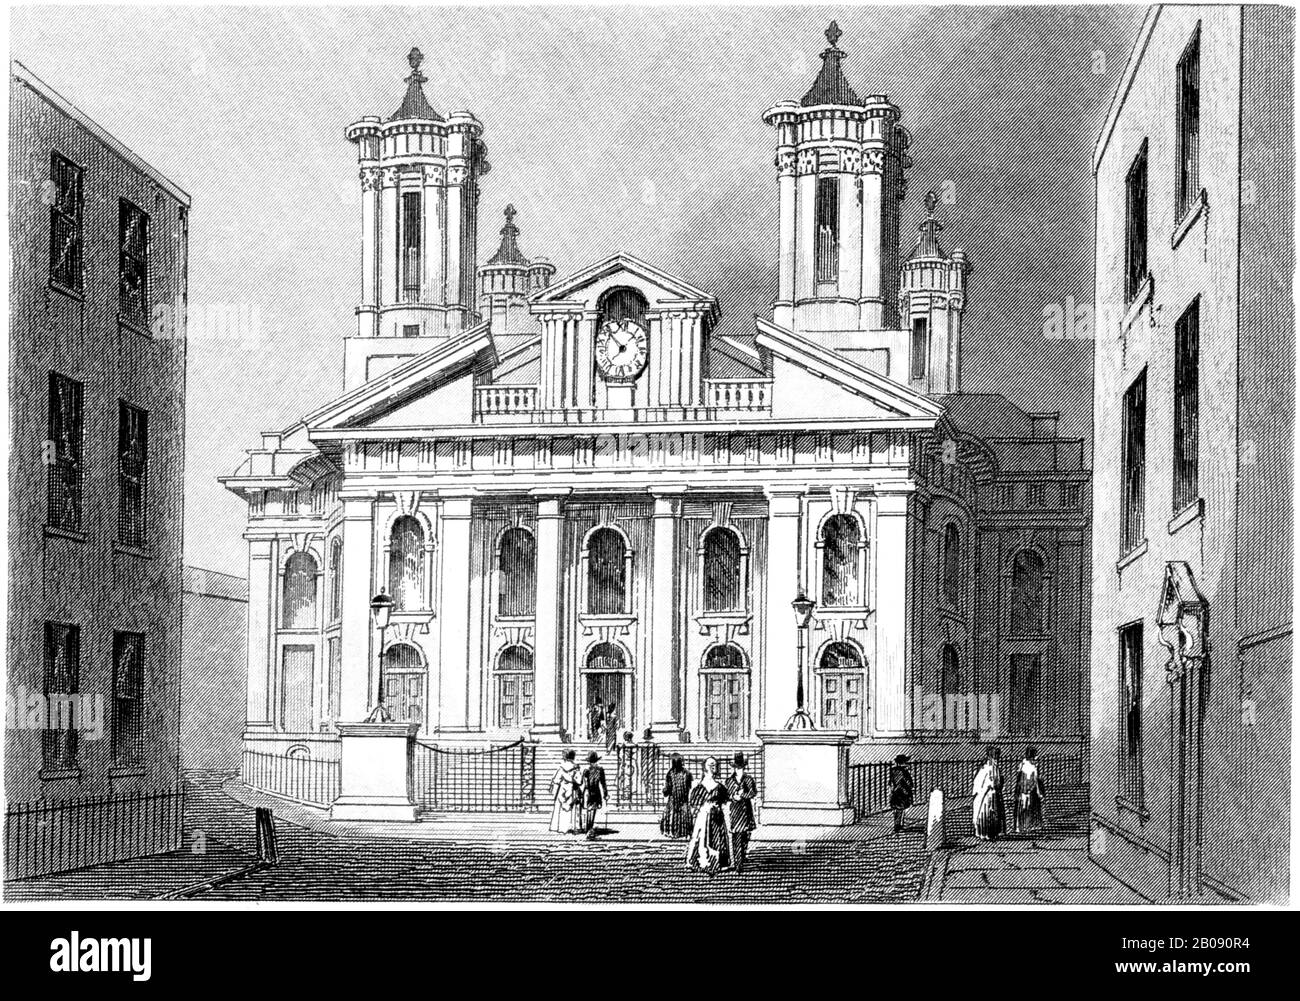 Engraving of St Johns Westminster, London scanned at high resolution from a book printed in 1851. This image is believed to be free of all copyright. Stock Photo